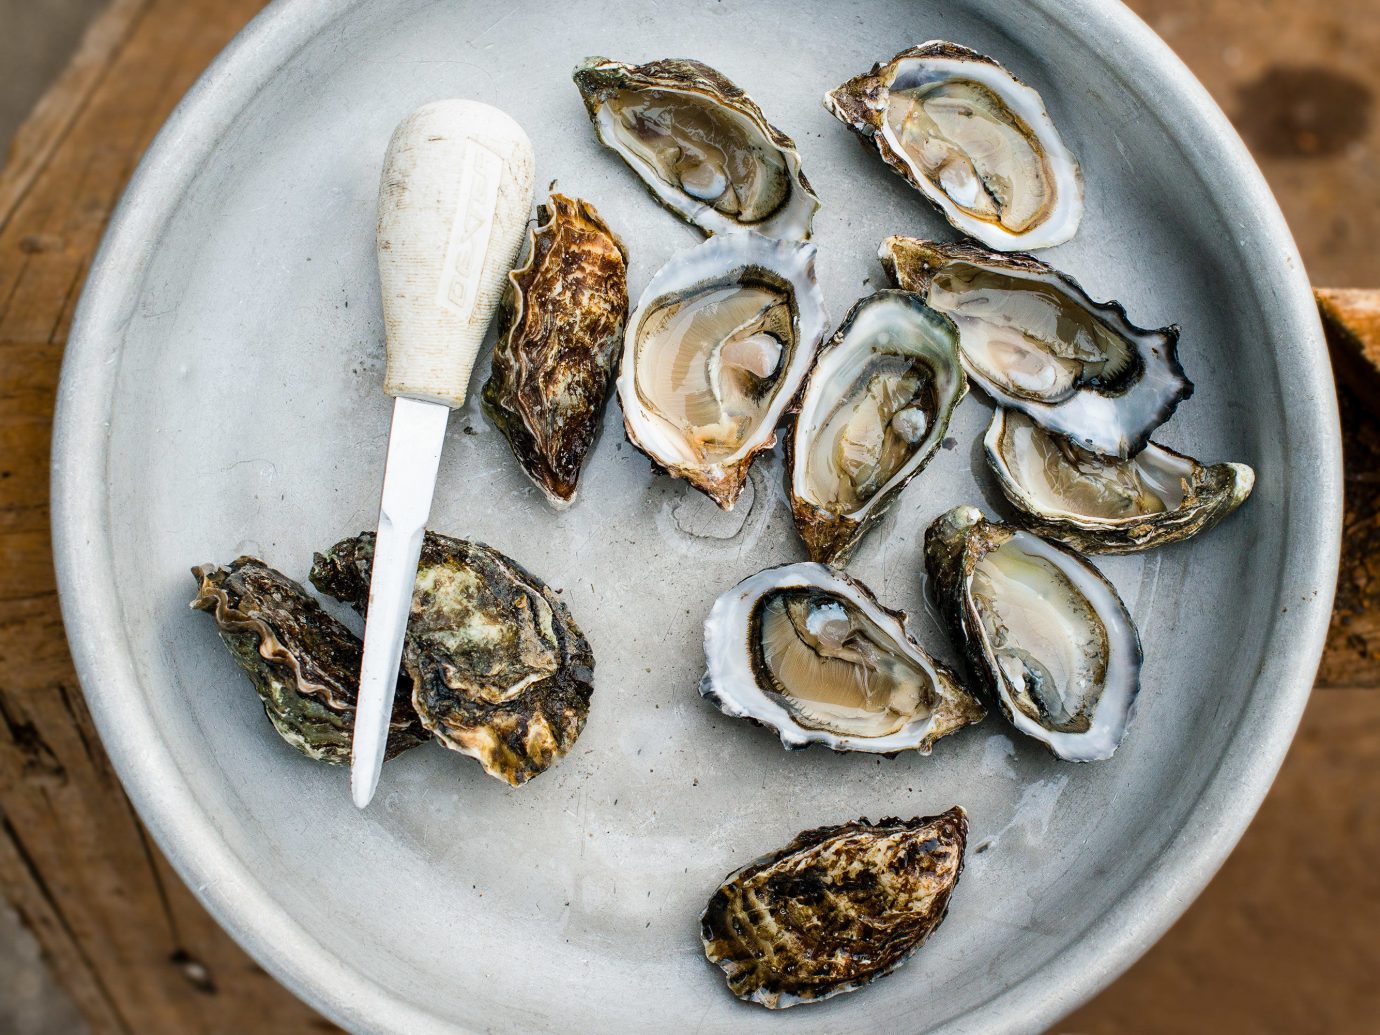 Trip Ideas plate oyster food Seafood clams oysters mussels and scallops oysters rockefeller animal source foods mussel dish slice clam recipe edible seed sliced meal